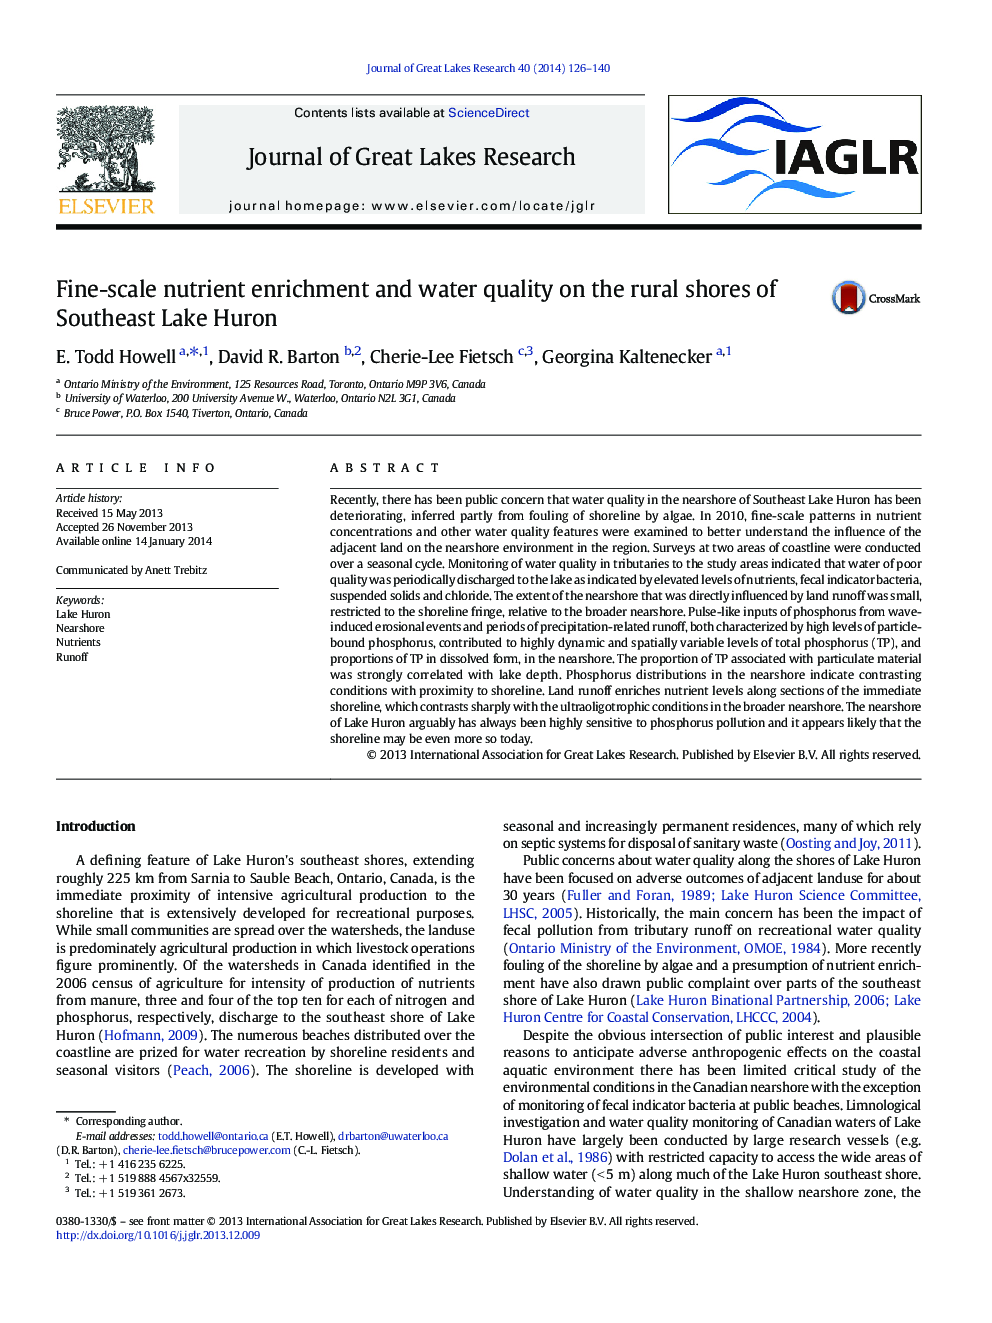 Fine-scale nutrient enrichment and water quality on the rural shores of Southeast Lake Huron